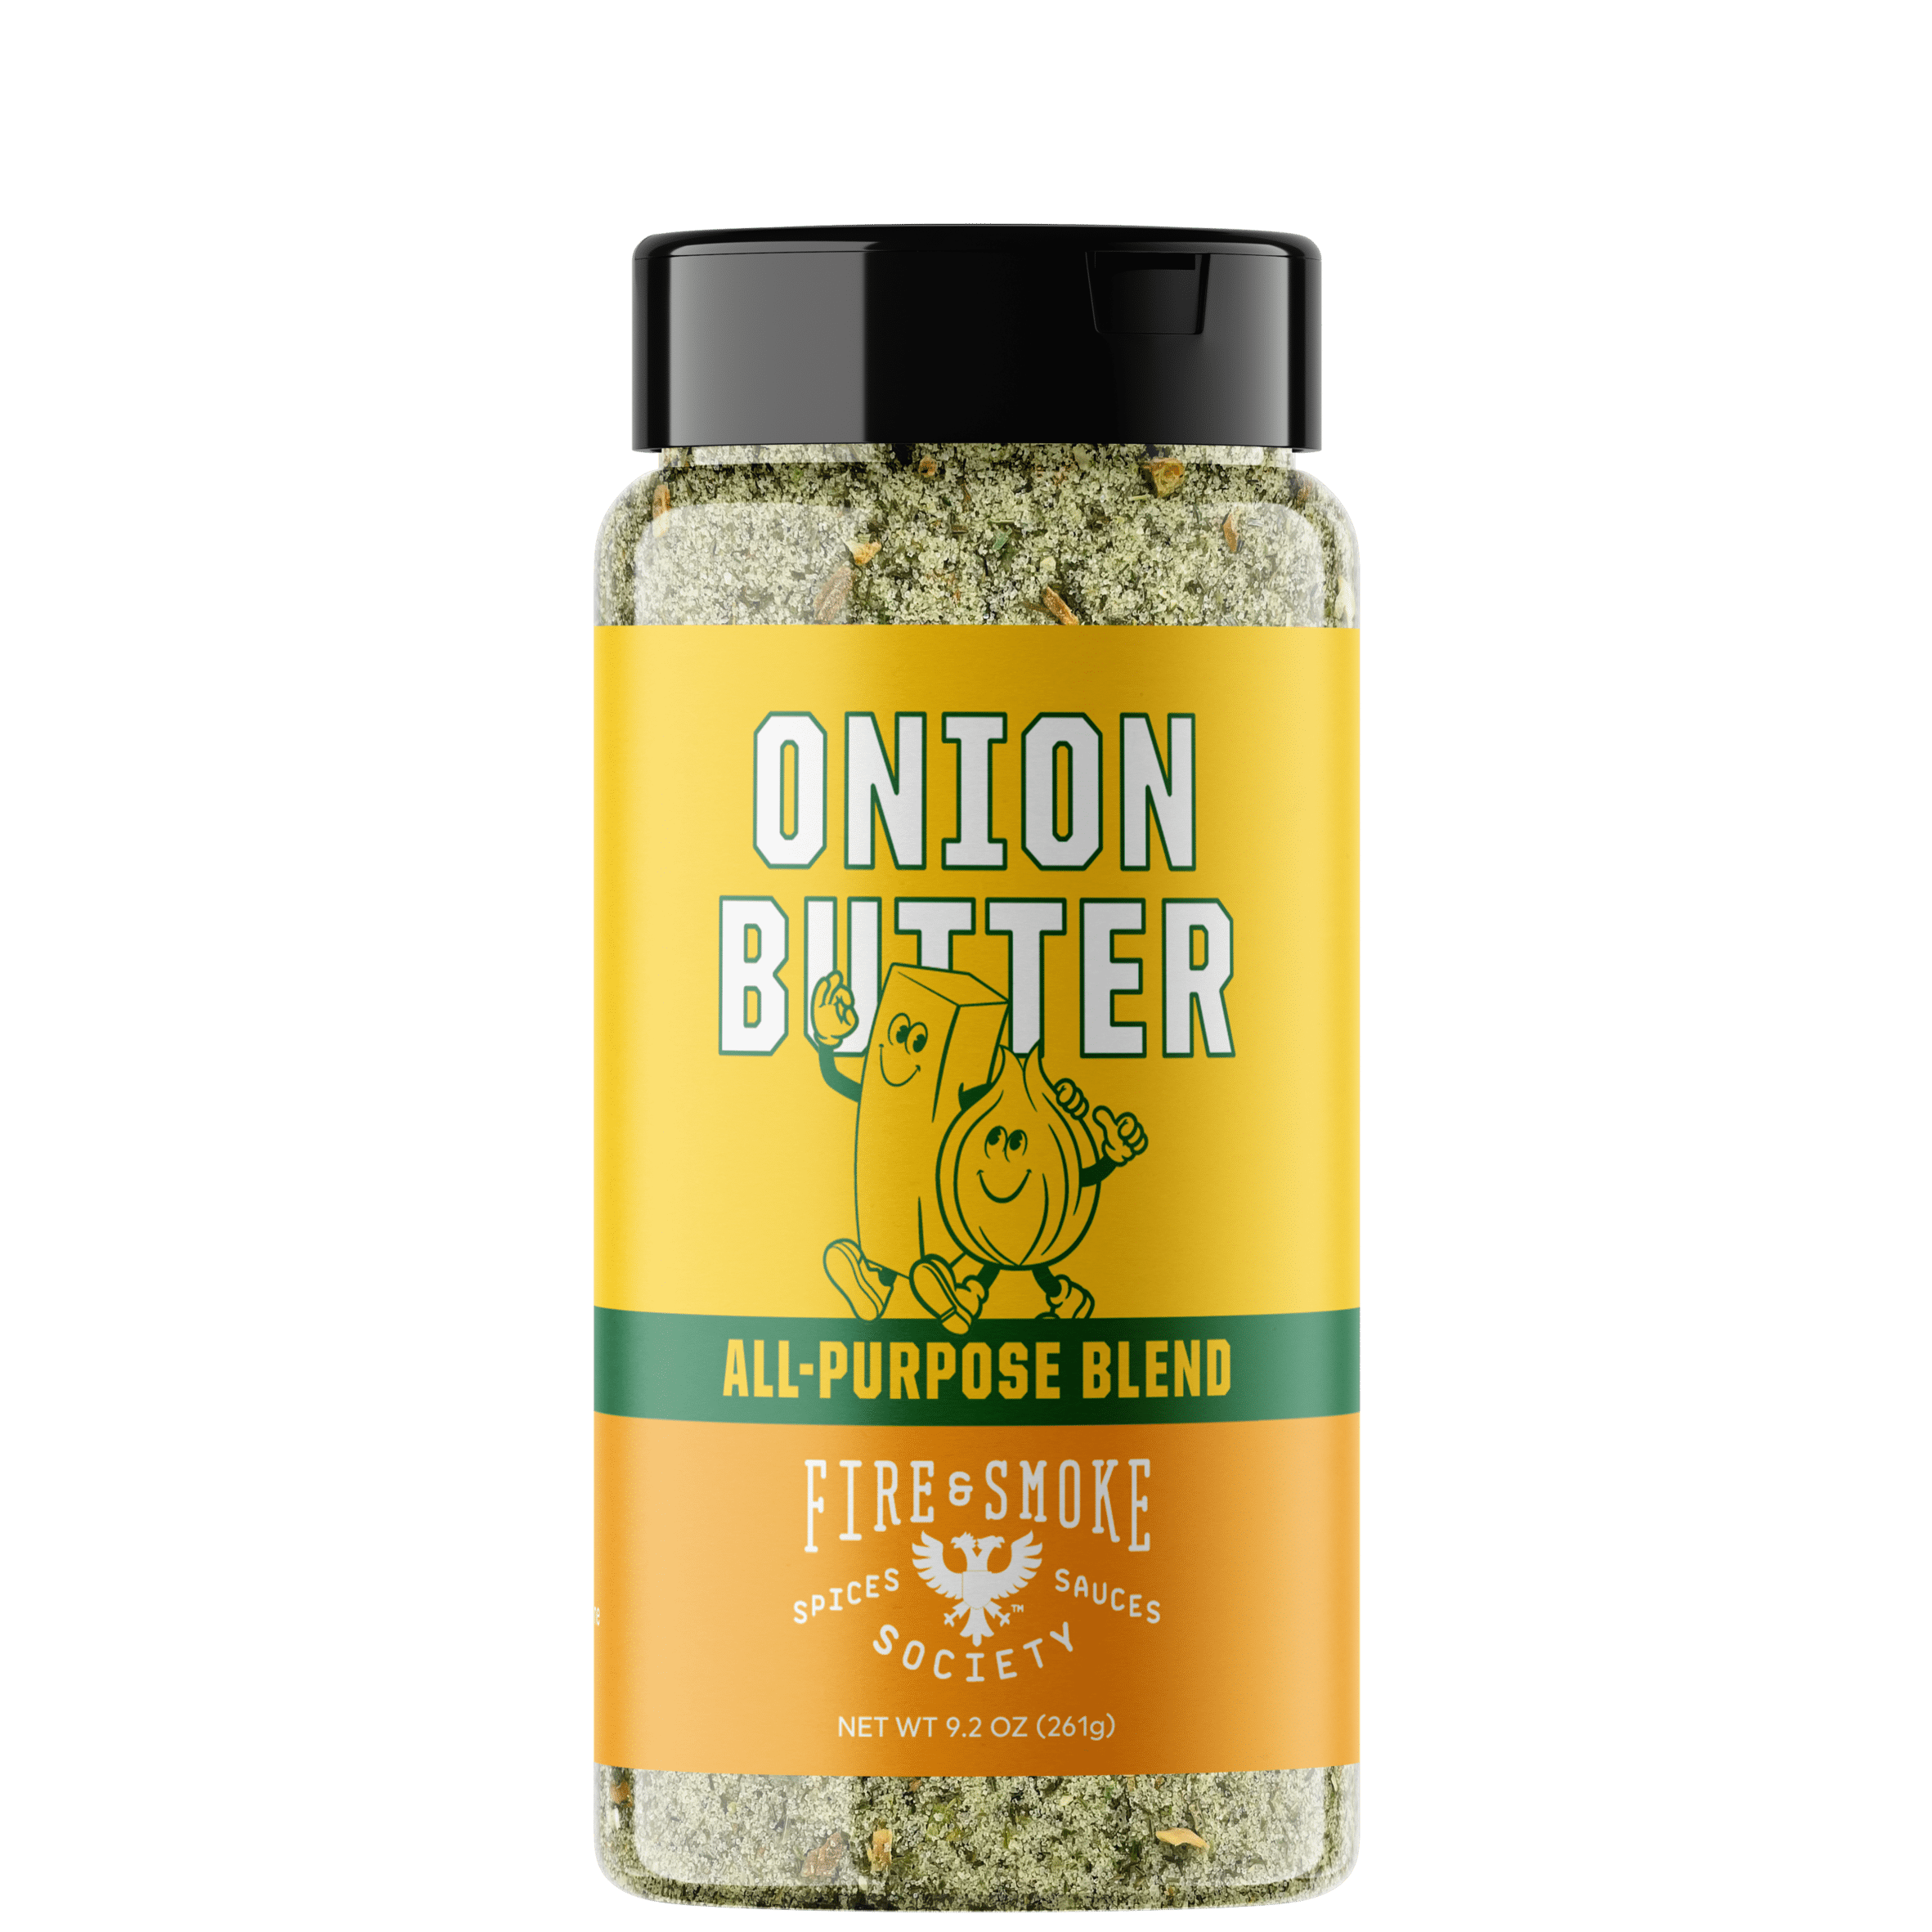 Fire & Smoke Society Onion Butter All Purpose Spice Blend, 9.2 Ounce